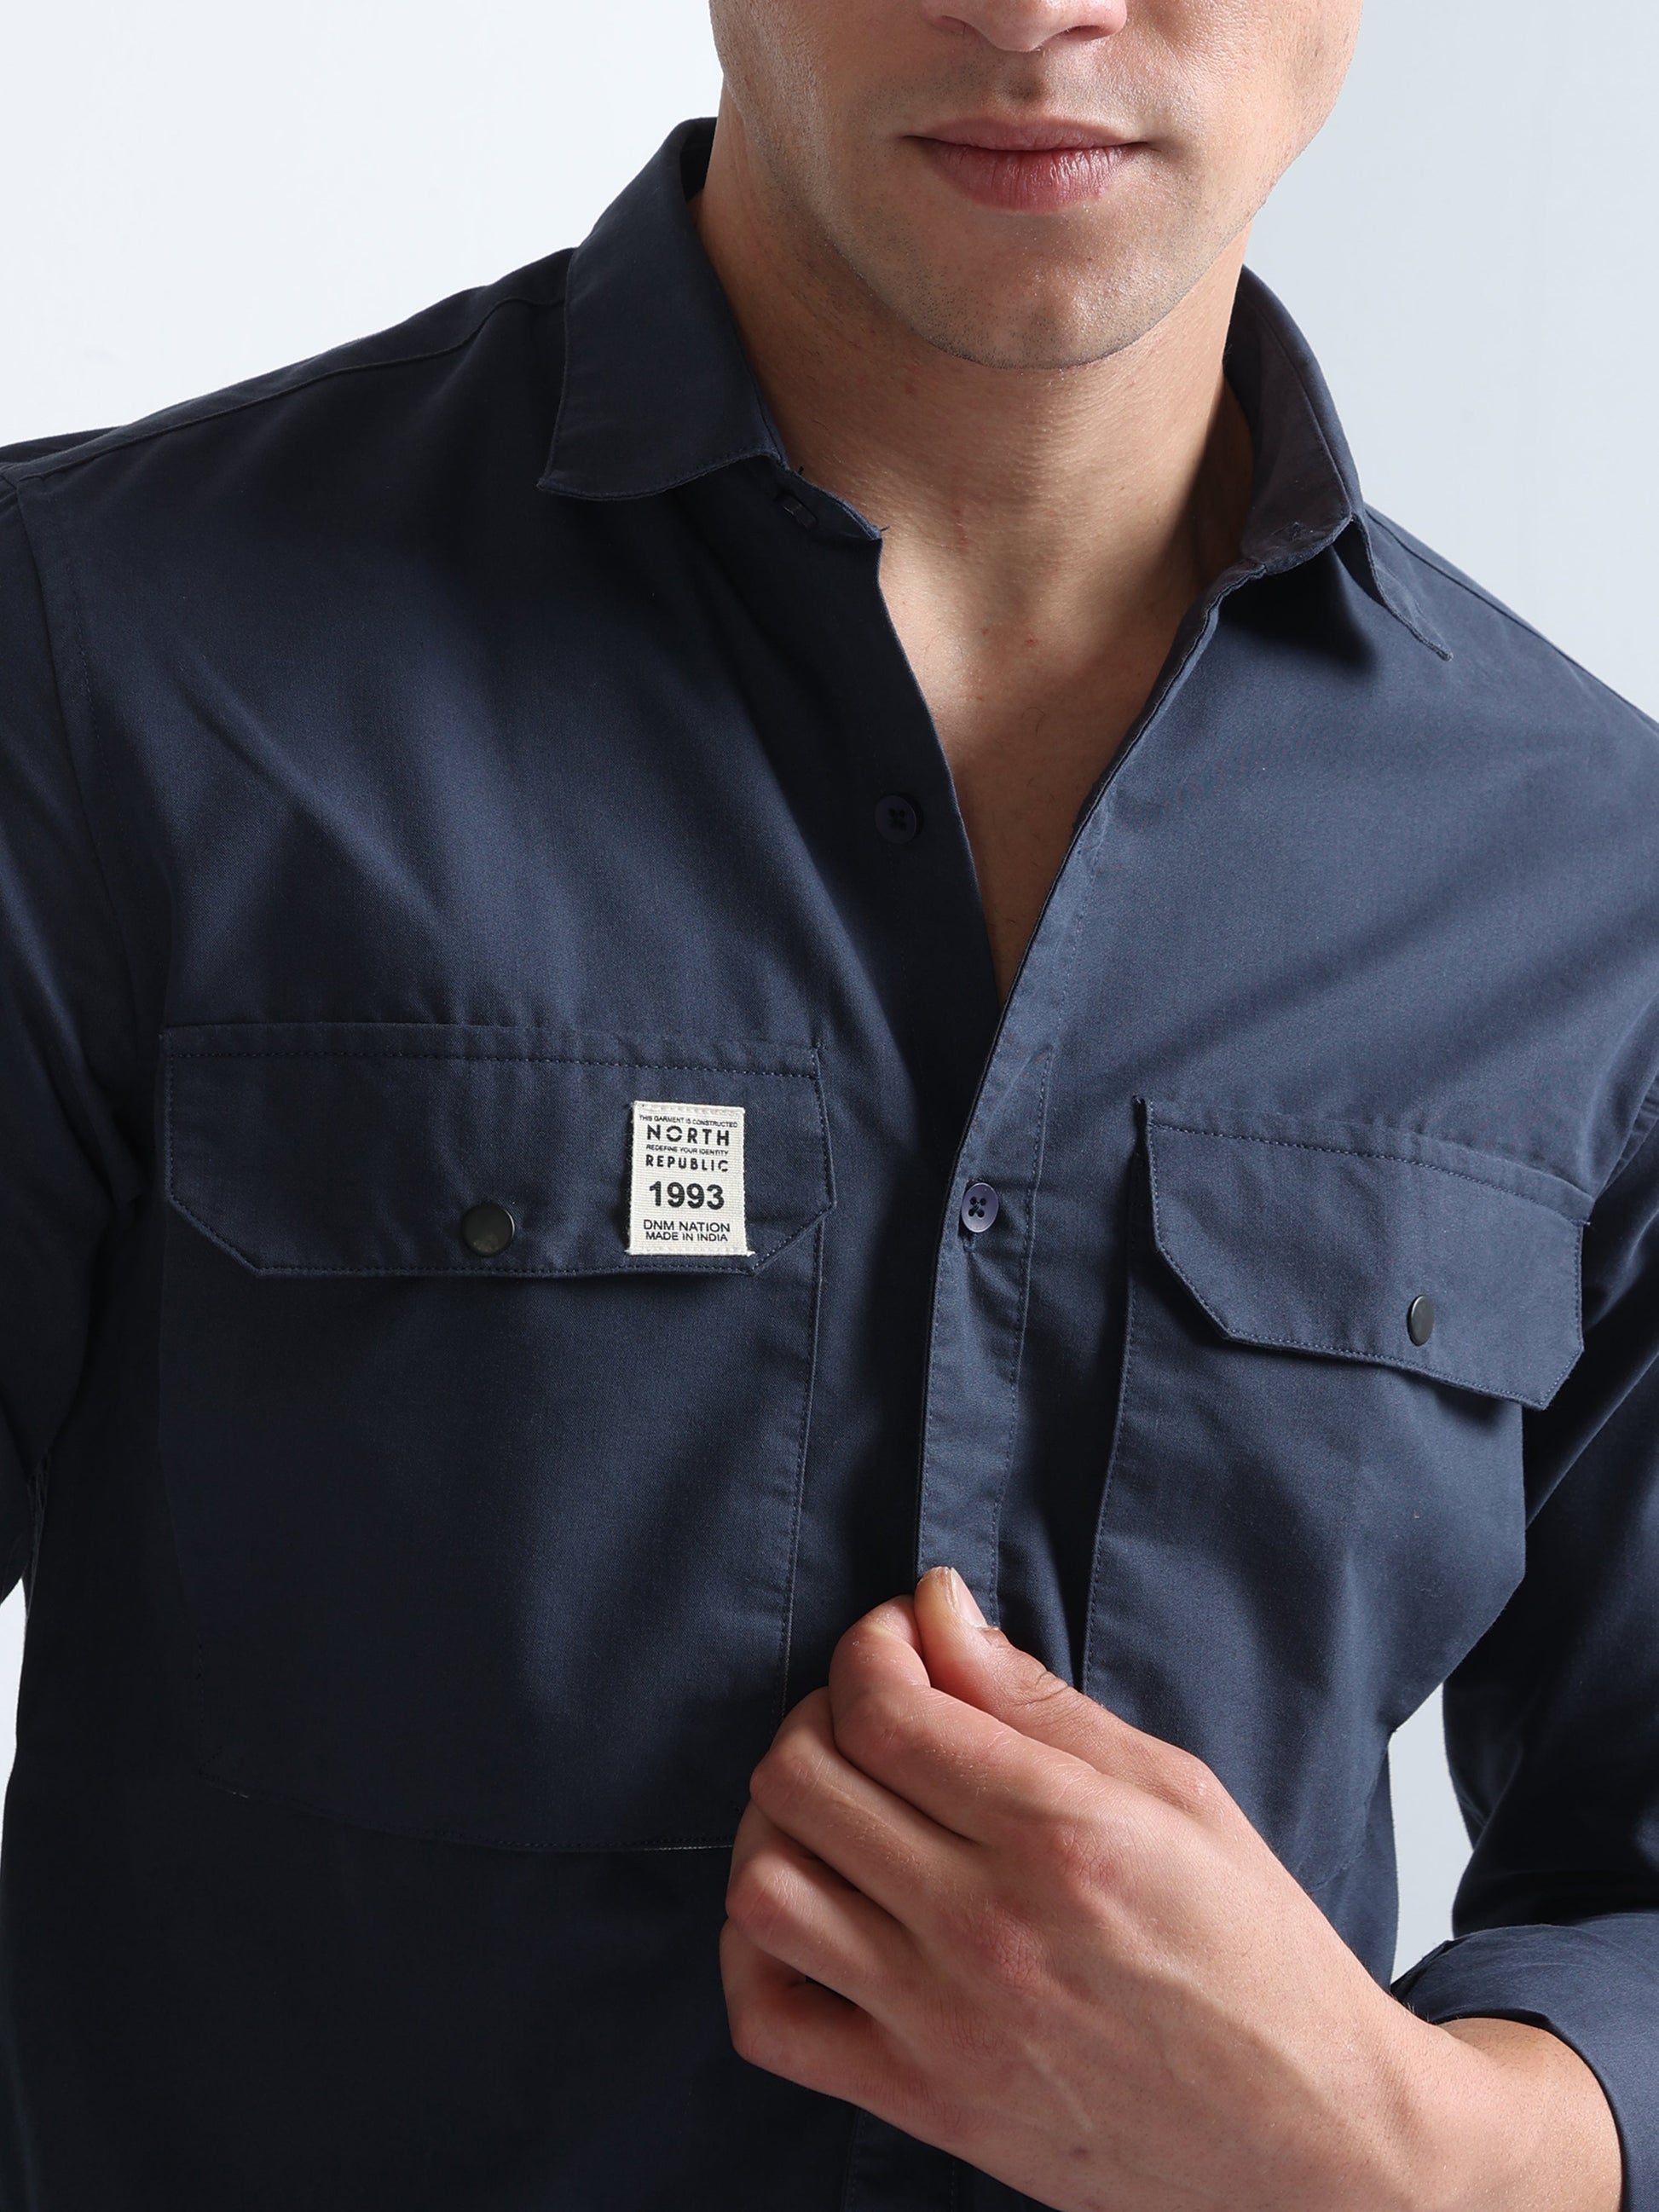 Buy Cargo Double Pocket Fashionable Twill Shirt For Mens Online.